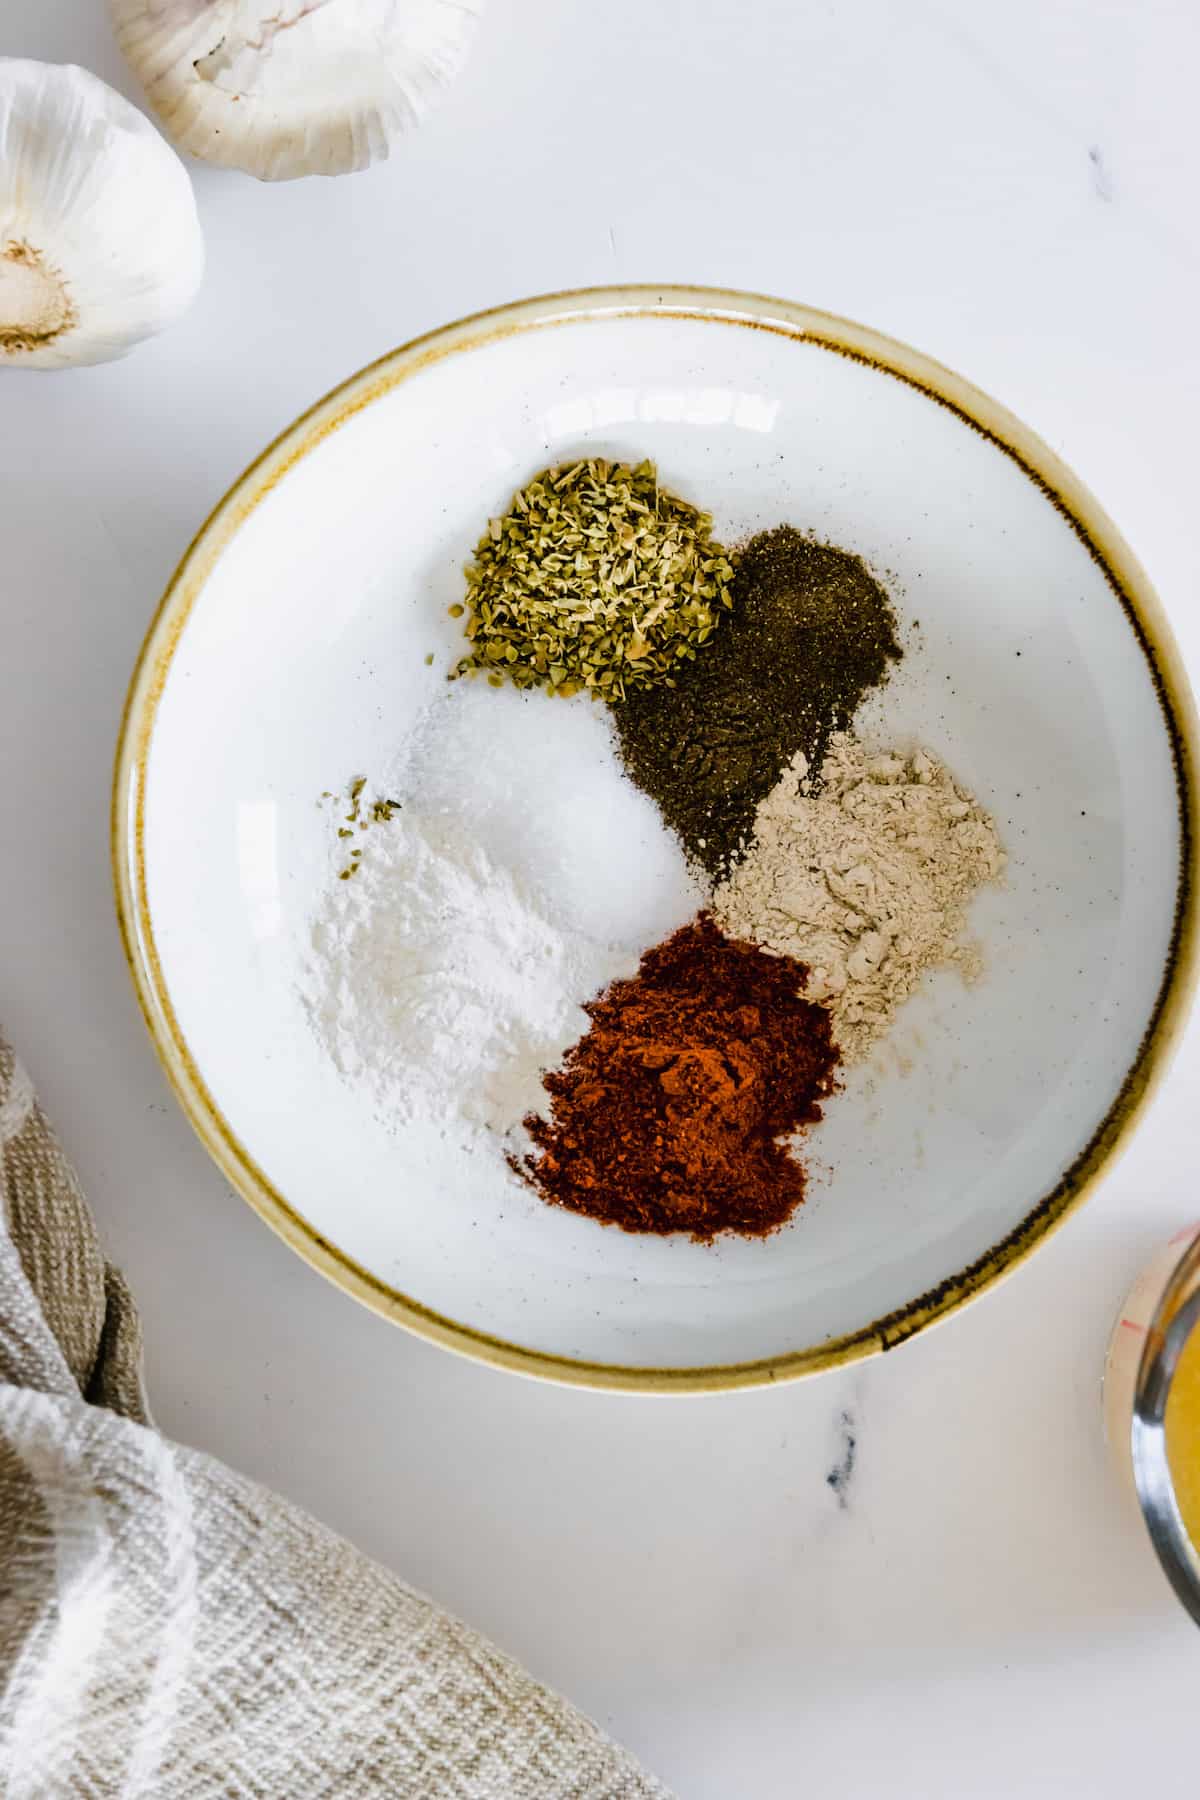 Salt, Oregano, Smoked Paprika and the Rest of the Spice Rub Ingredients in a White Bowl